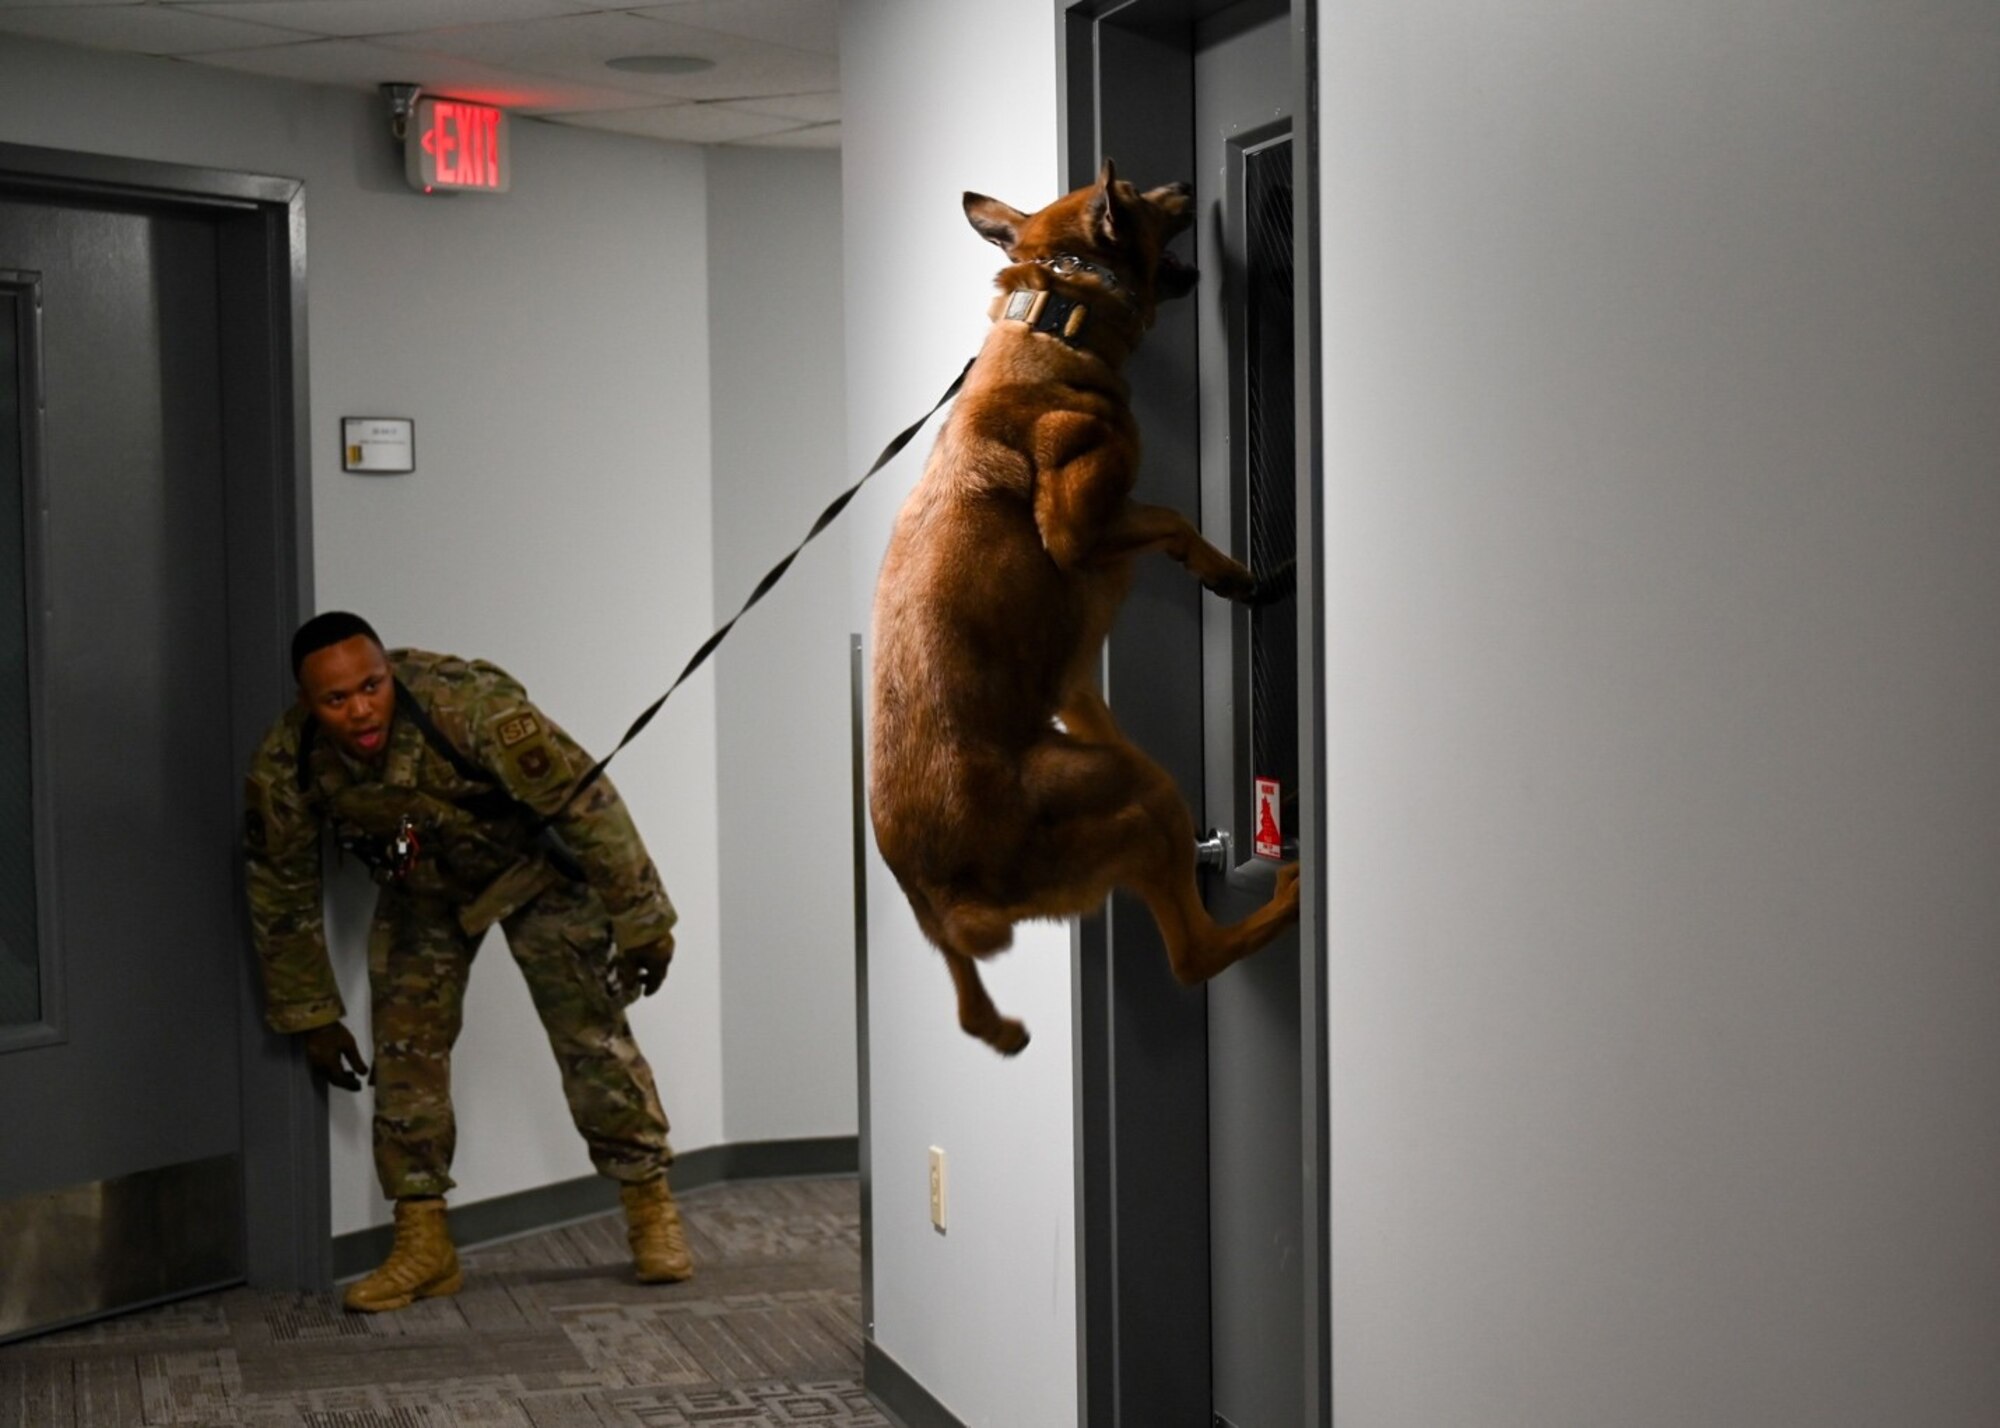 Lezer, a 28th Security Forces Squadron military working dog, and his handler, Staff Sgt. Ronald Dyer, demonstrate the skills and teamwork required to locate a suspect during a demonstration for area youth at Ellsworth Air Force Base, S.D., June 25, 2021.